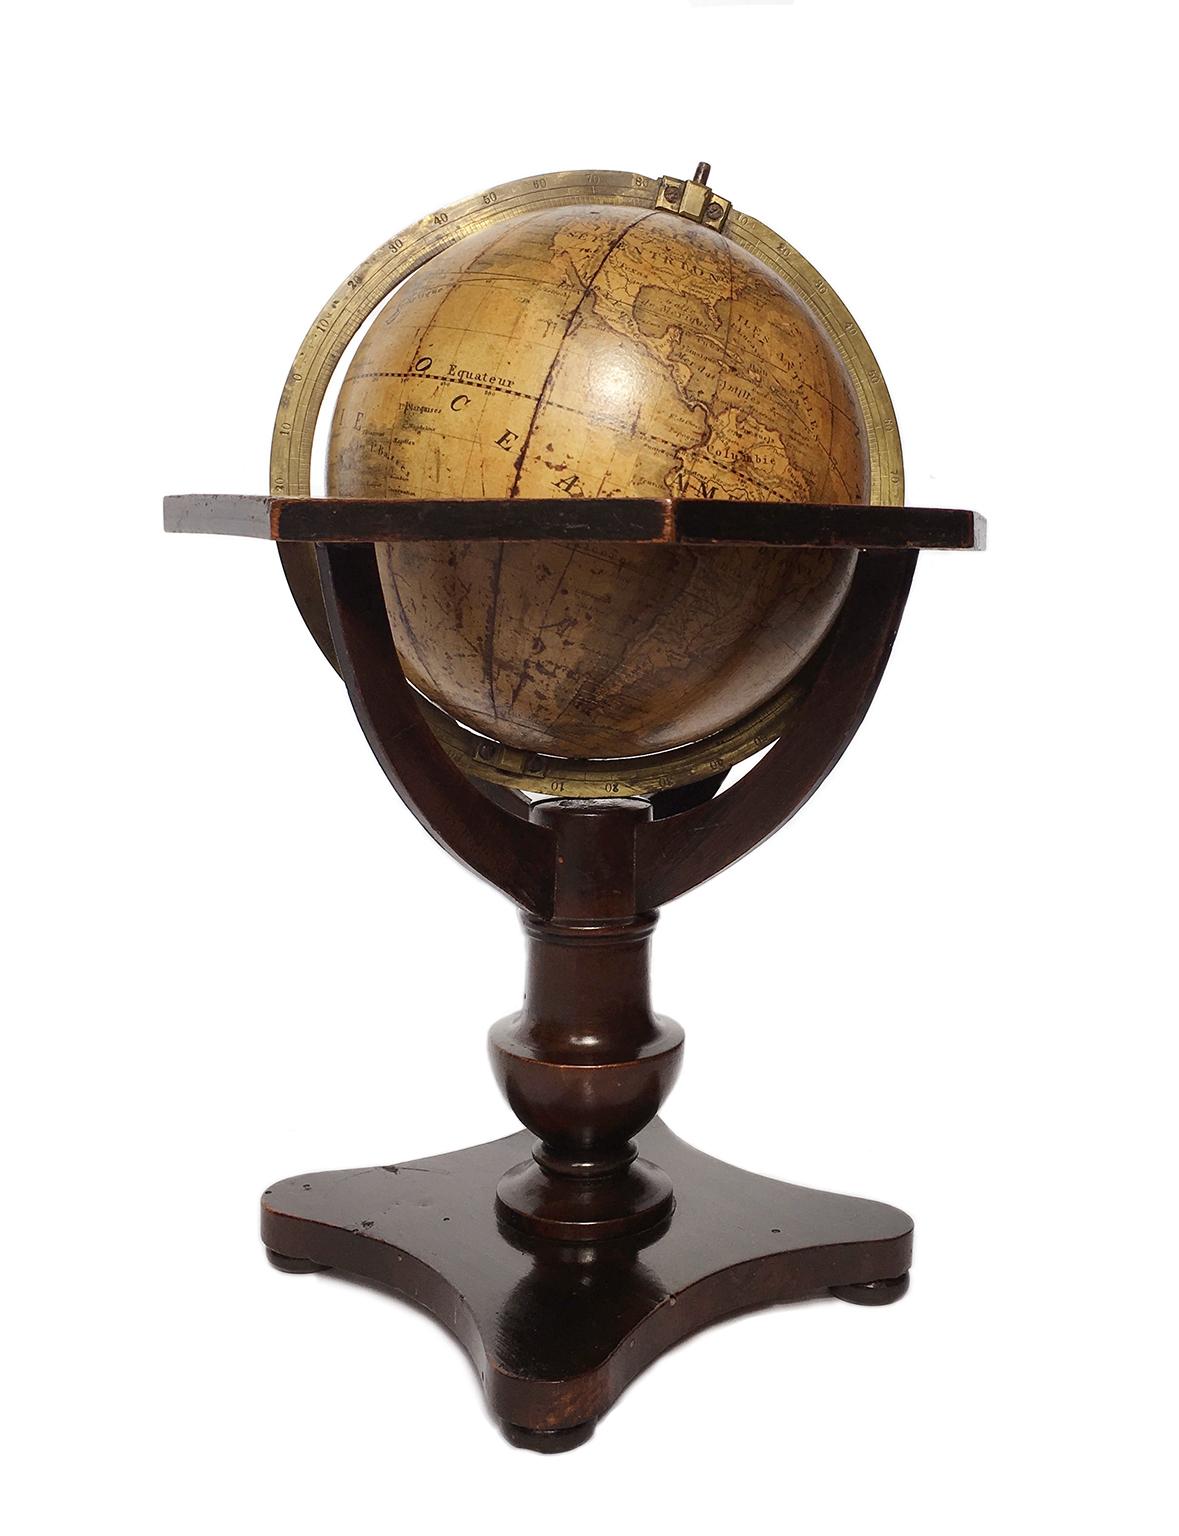 Terrestrial globe
Artistic company C. Abel - Klinger
Nuremberg, circa 1860
H cm 31 x 22 cm (12.20 x 8.66 in); sphere 14 cm (5.51 in) in diameter
lb 2.30 (kg 1.04)
State of conservation: good. On the sphere there are slight visible signs of